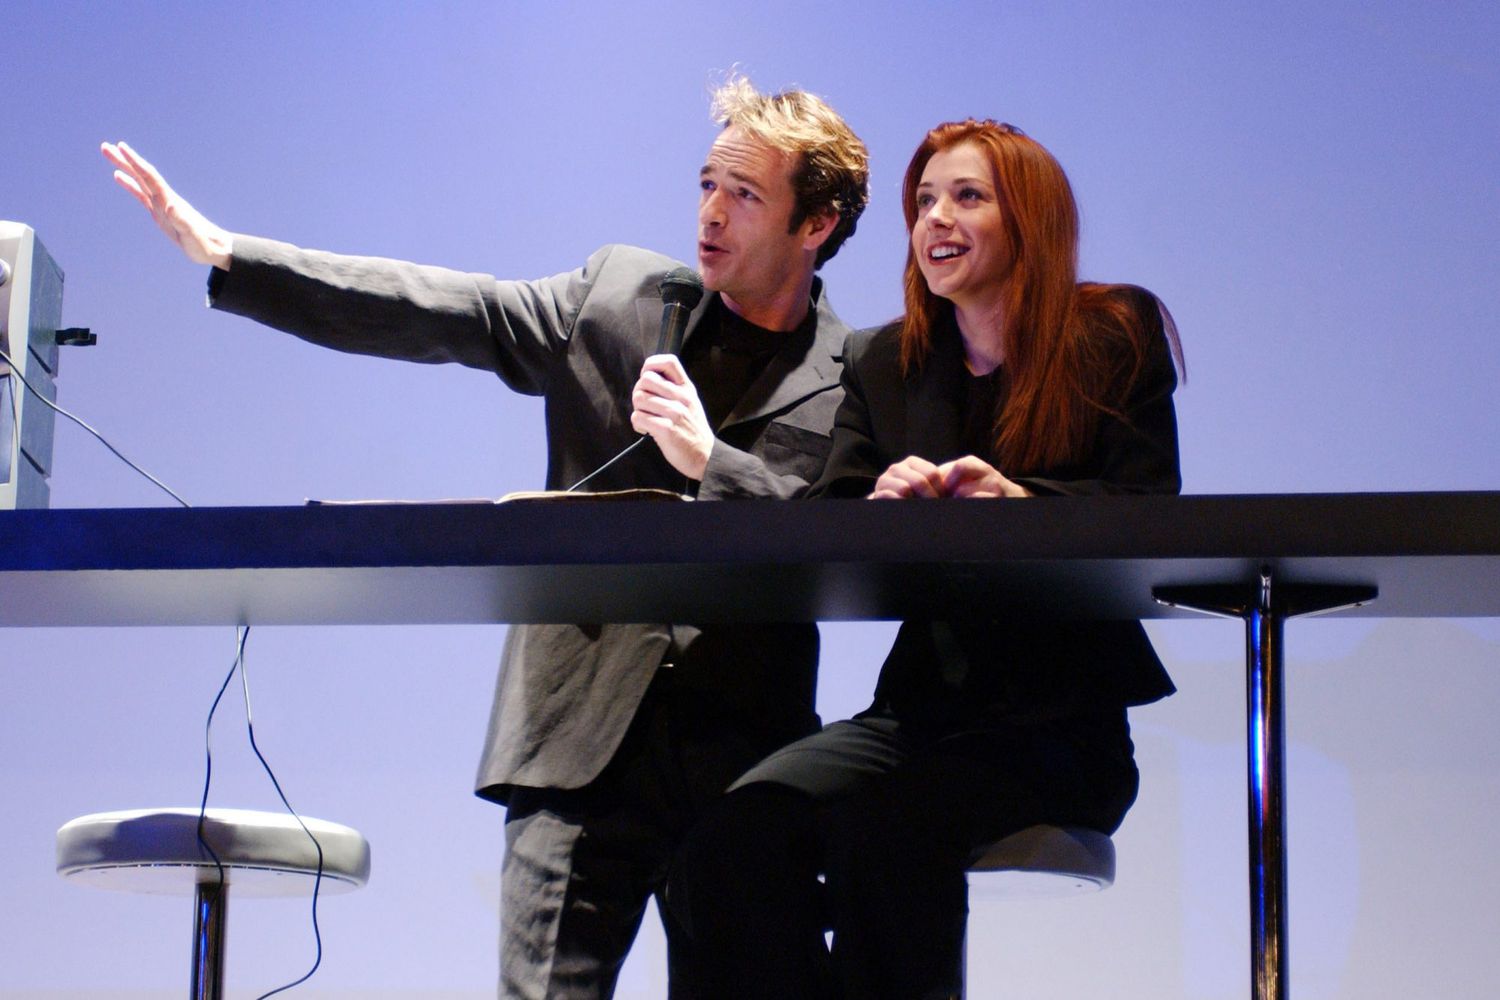 Luke Perry and Alyson Hannigan appearing onstage in&nbsp;When Harry Met Sally&nbsp;in London in 2004